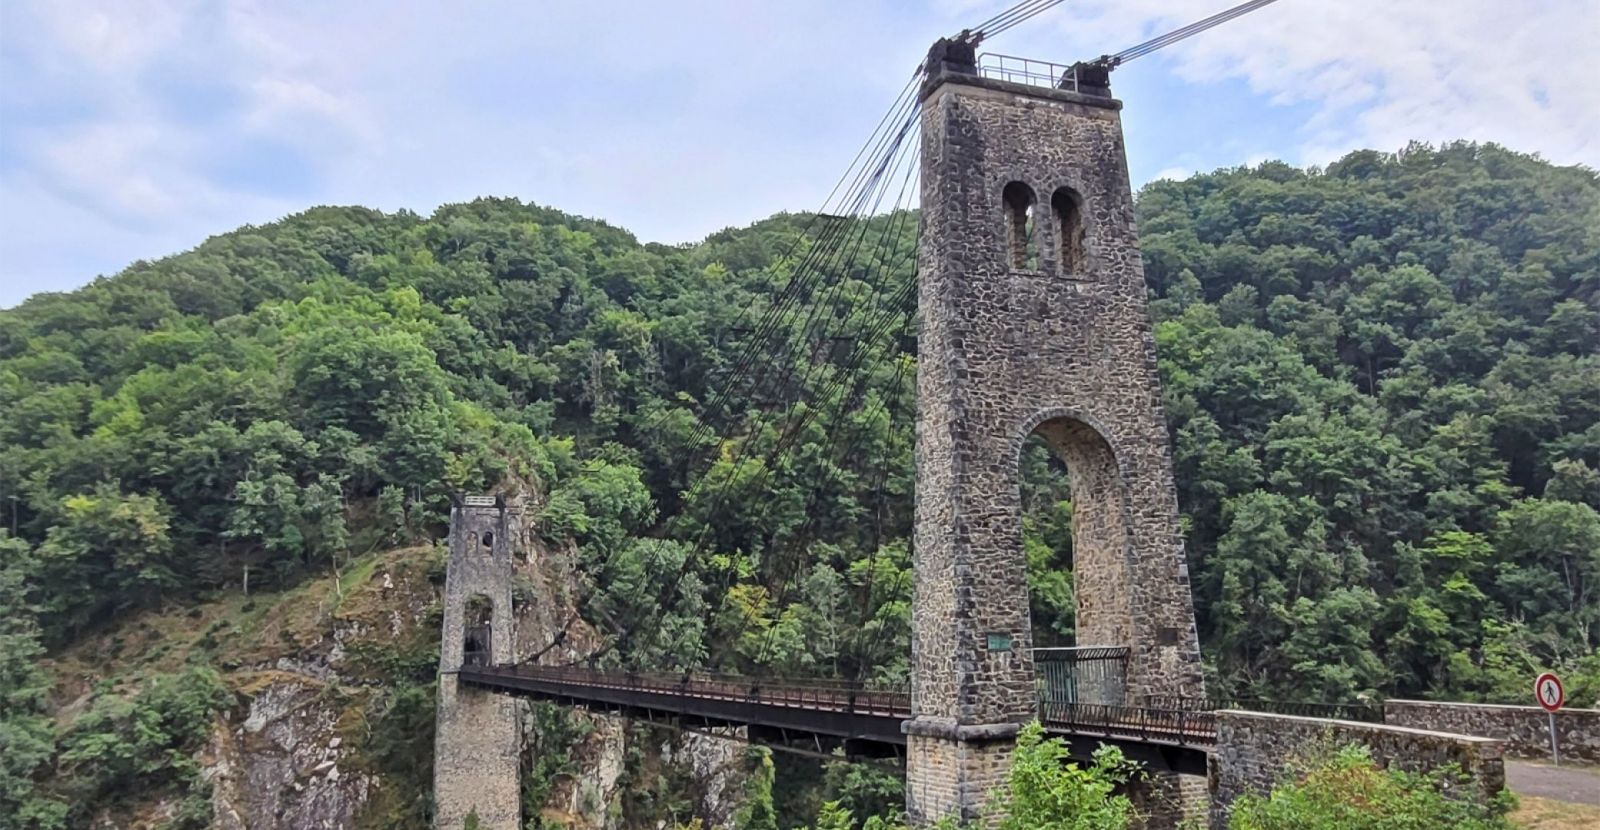 Walk to the Rochers Noirs Viaduct and its susp ...